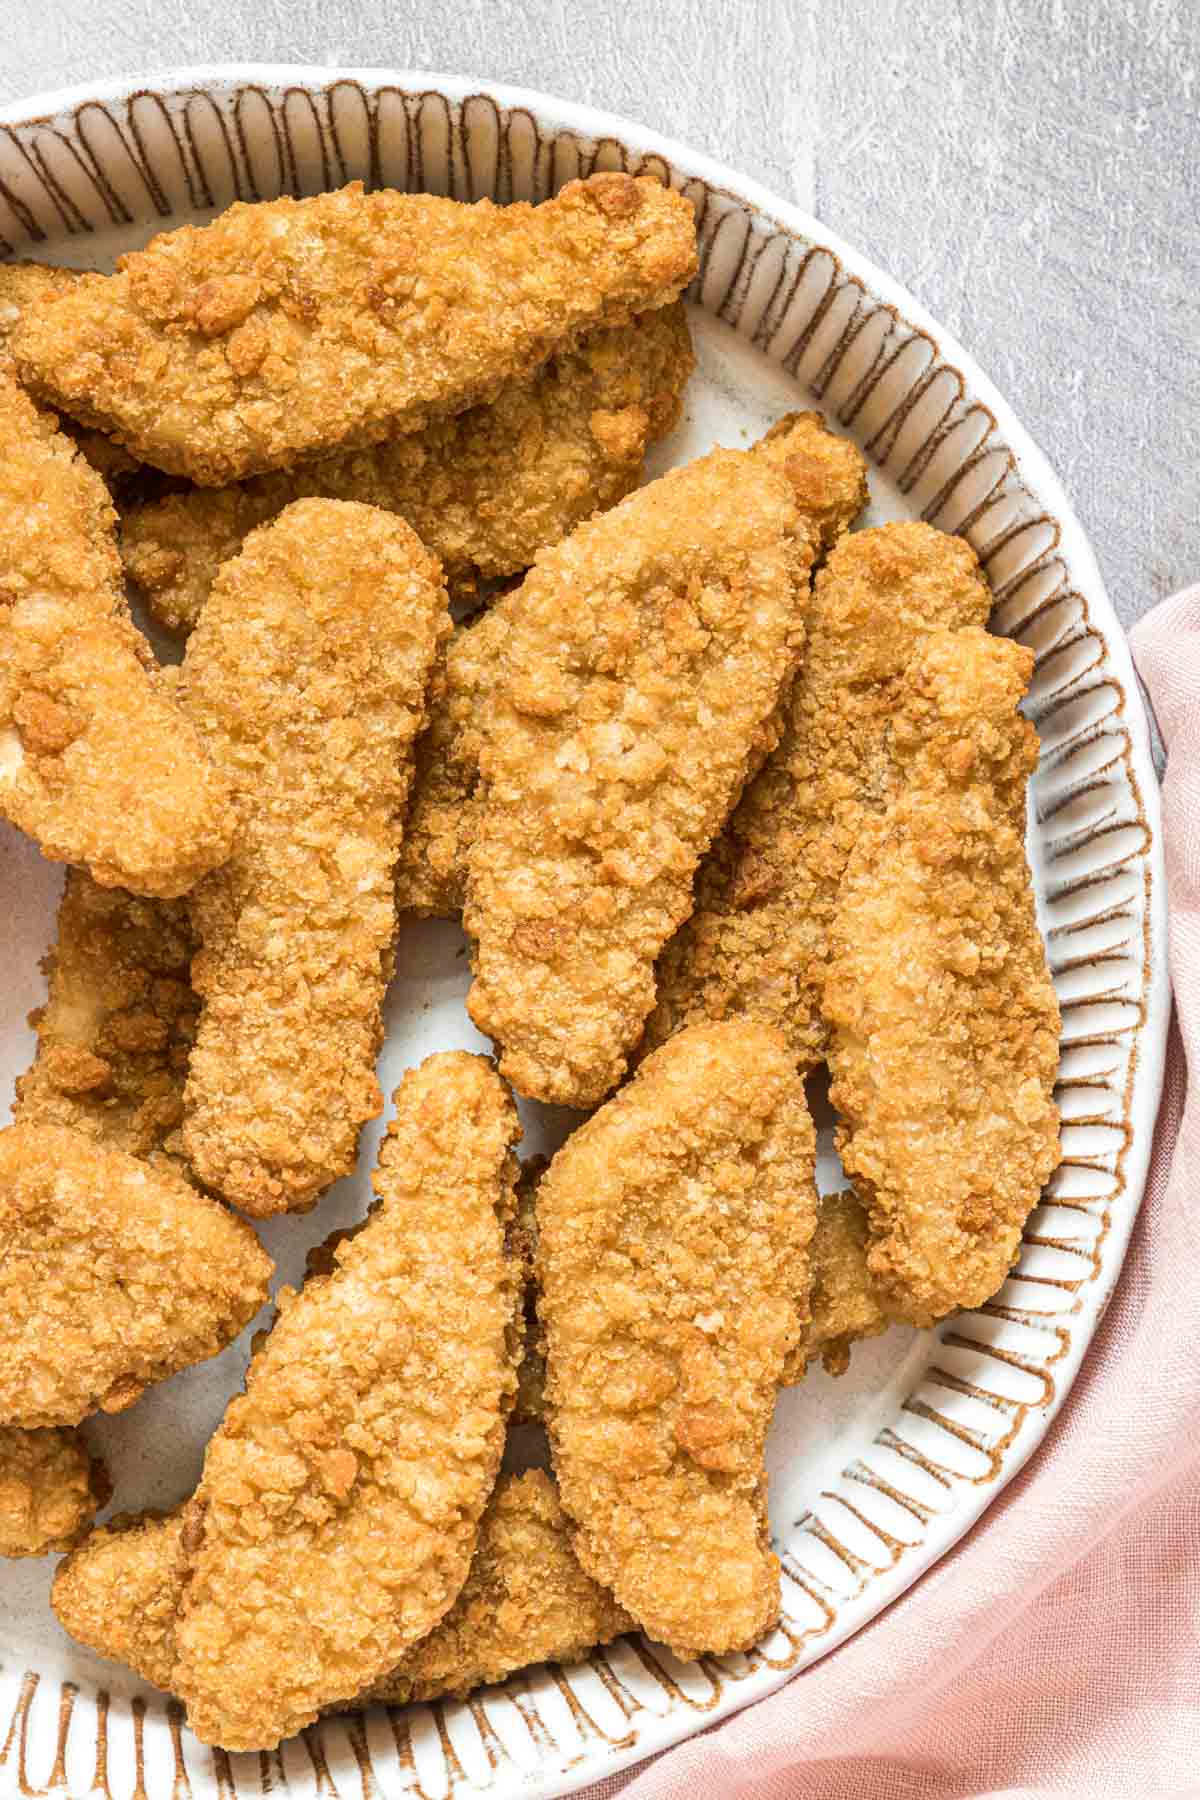 a plate of cooked frozen breaded chicken tenders